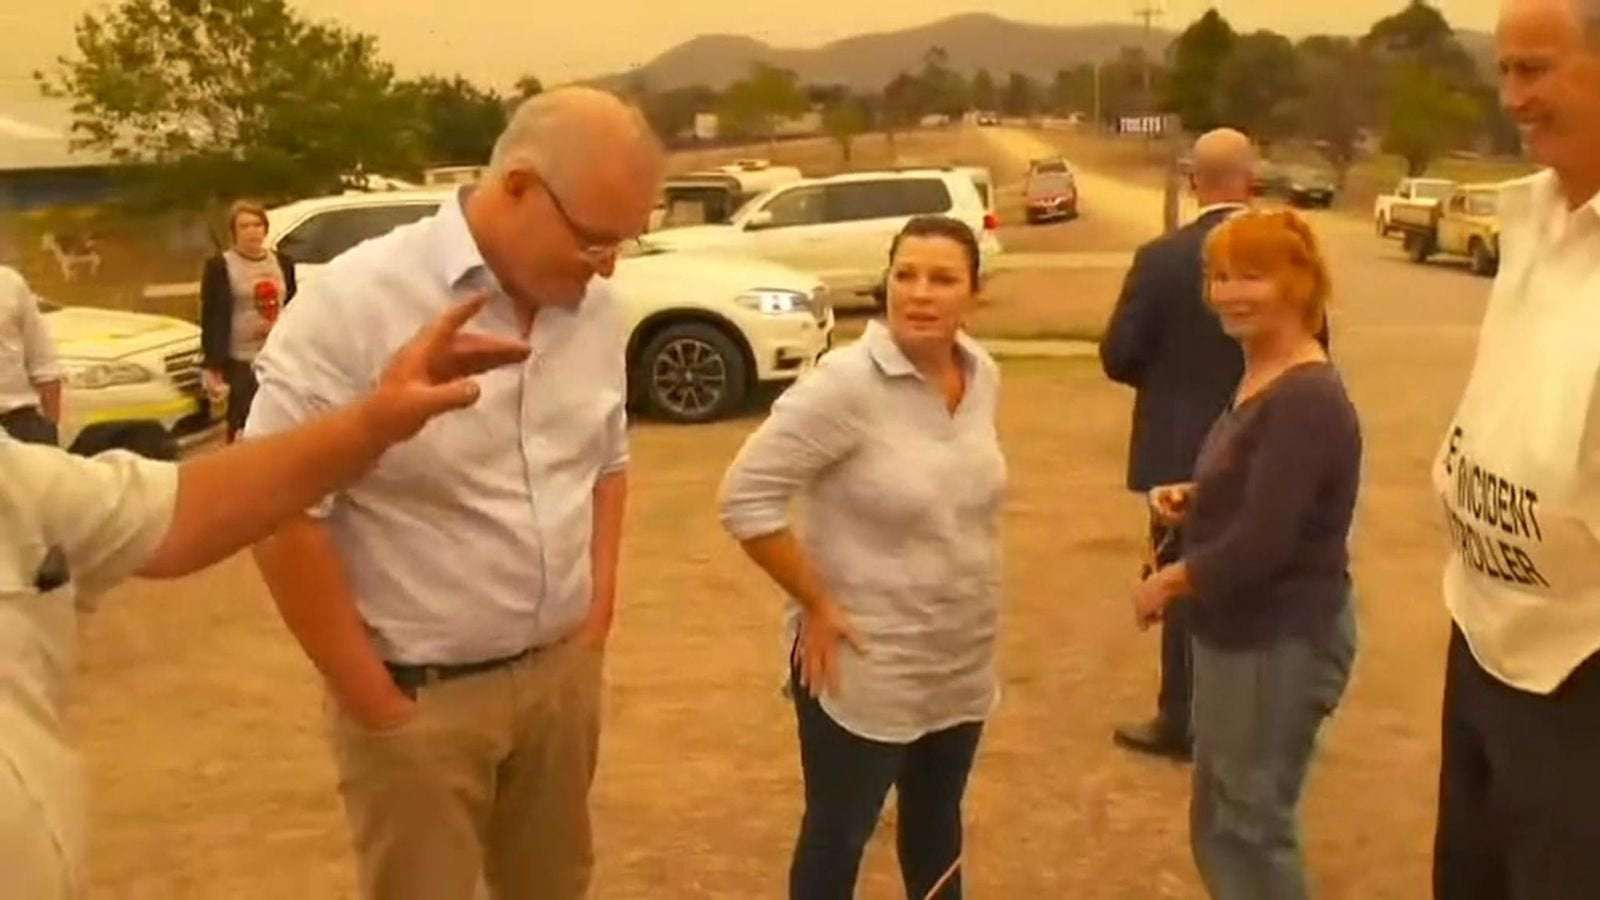 image for Australia wildfires: Scott Morrison told to 'p*** off' by angry residents